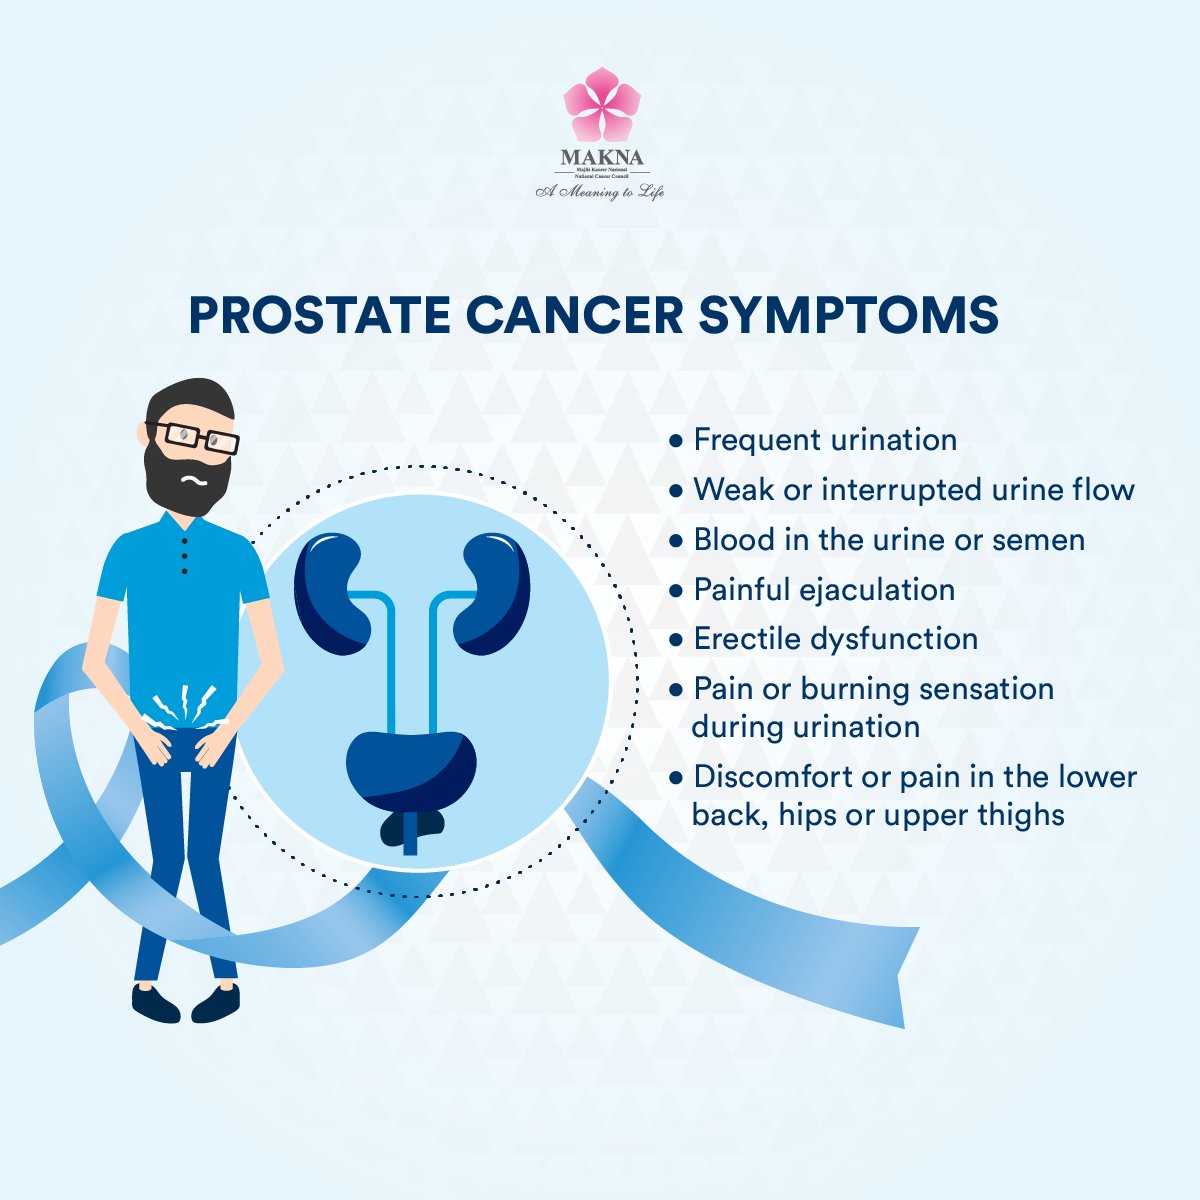 What Are Some Early Symptoms Of Prostate Cancer